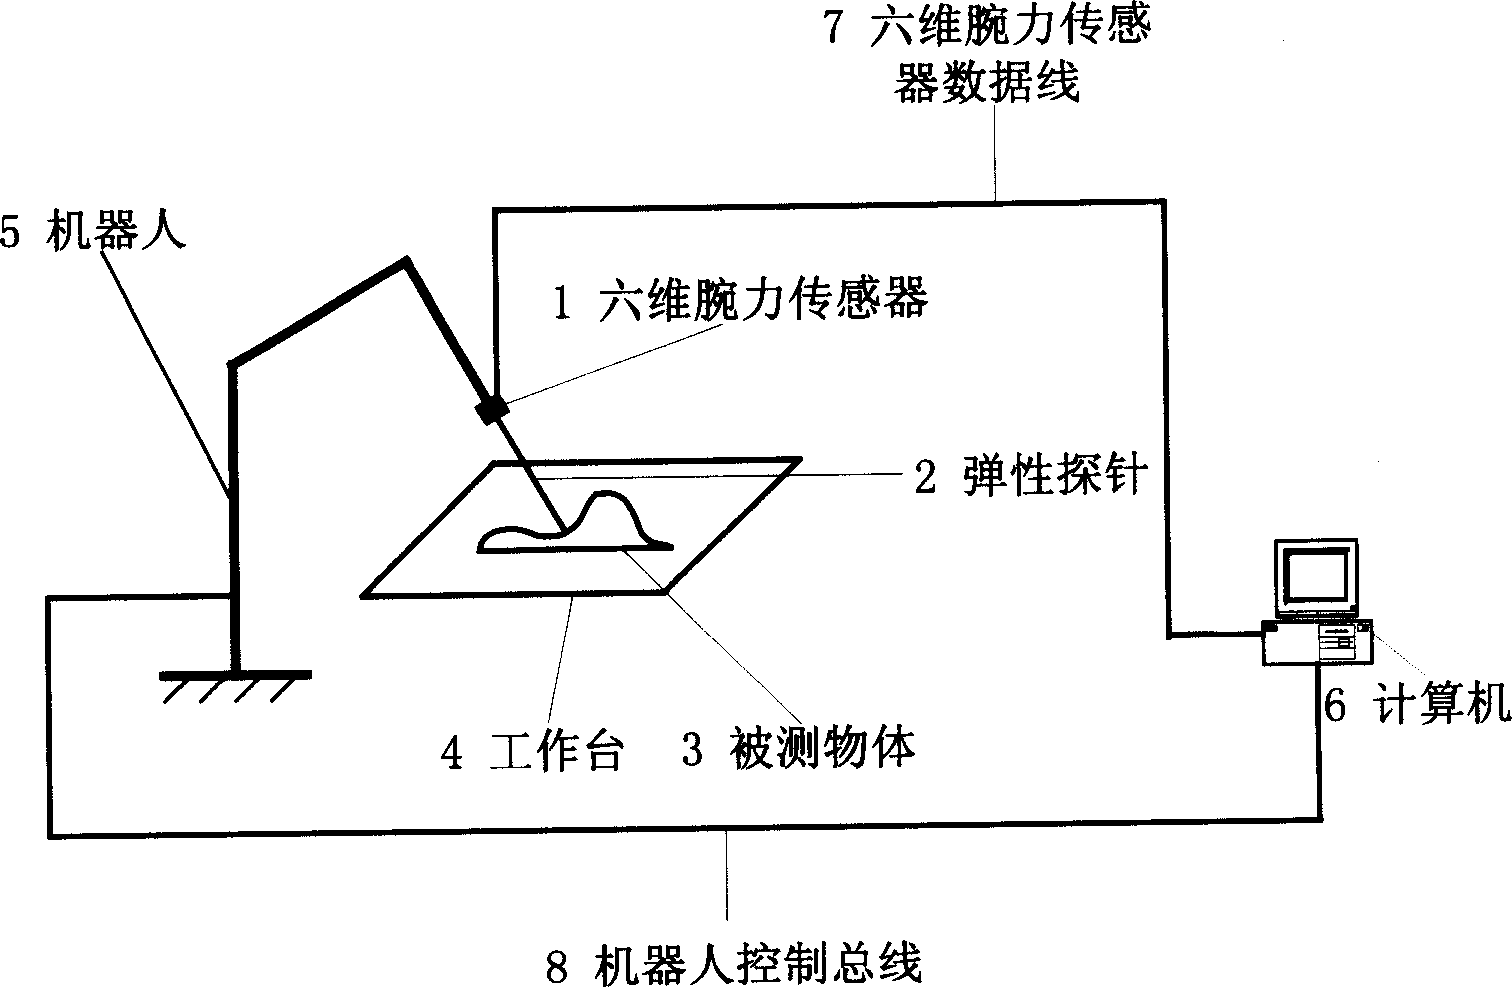 Contact type object position and gesture measurer